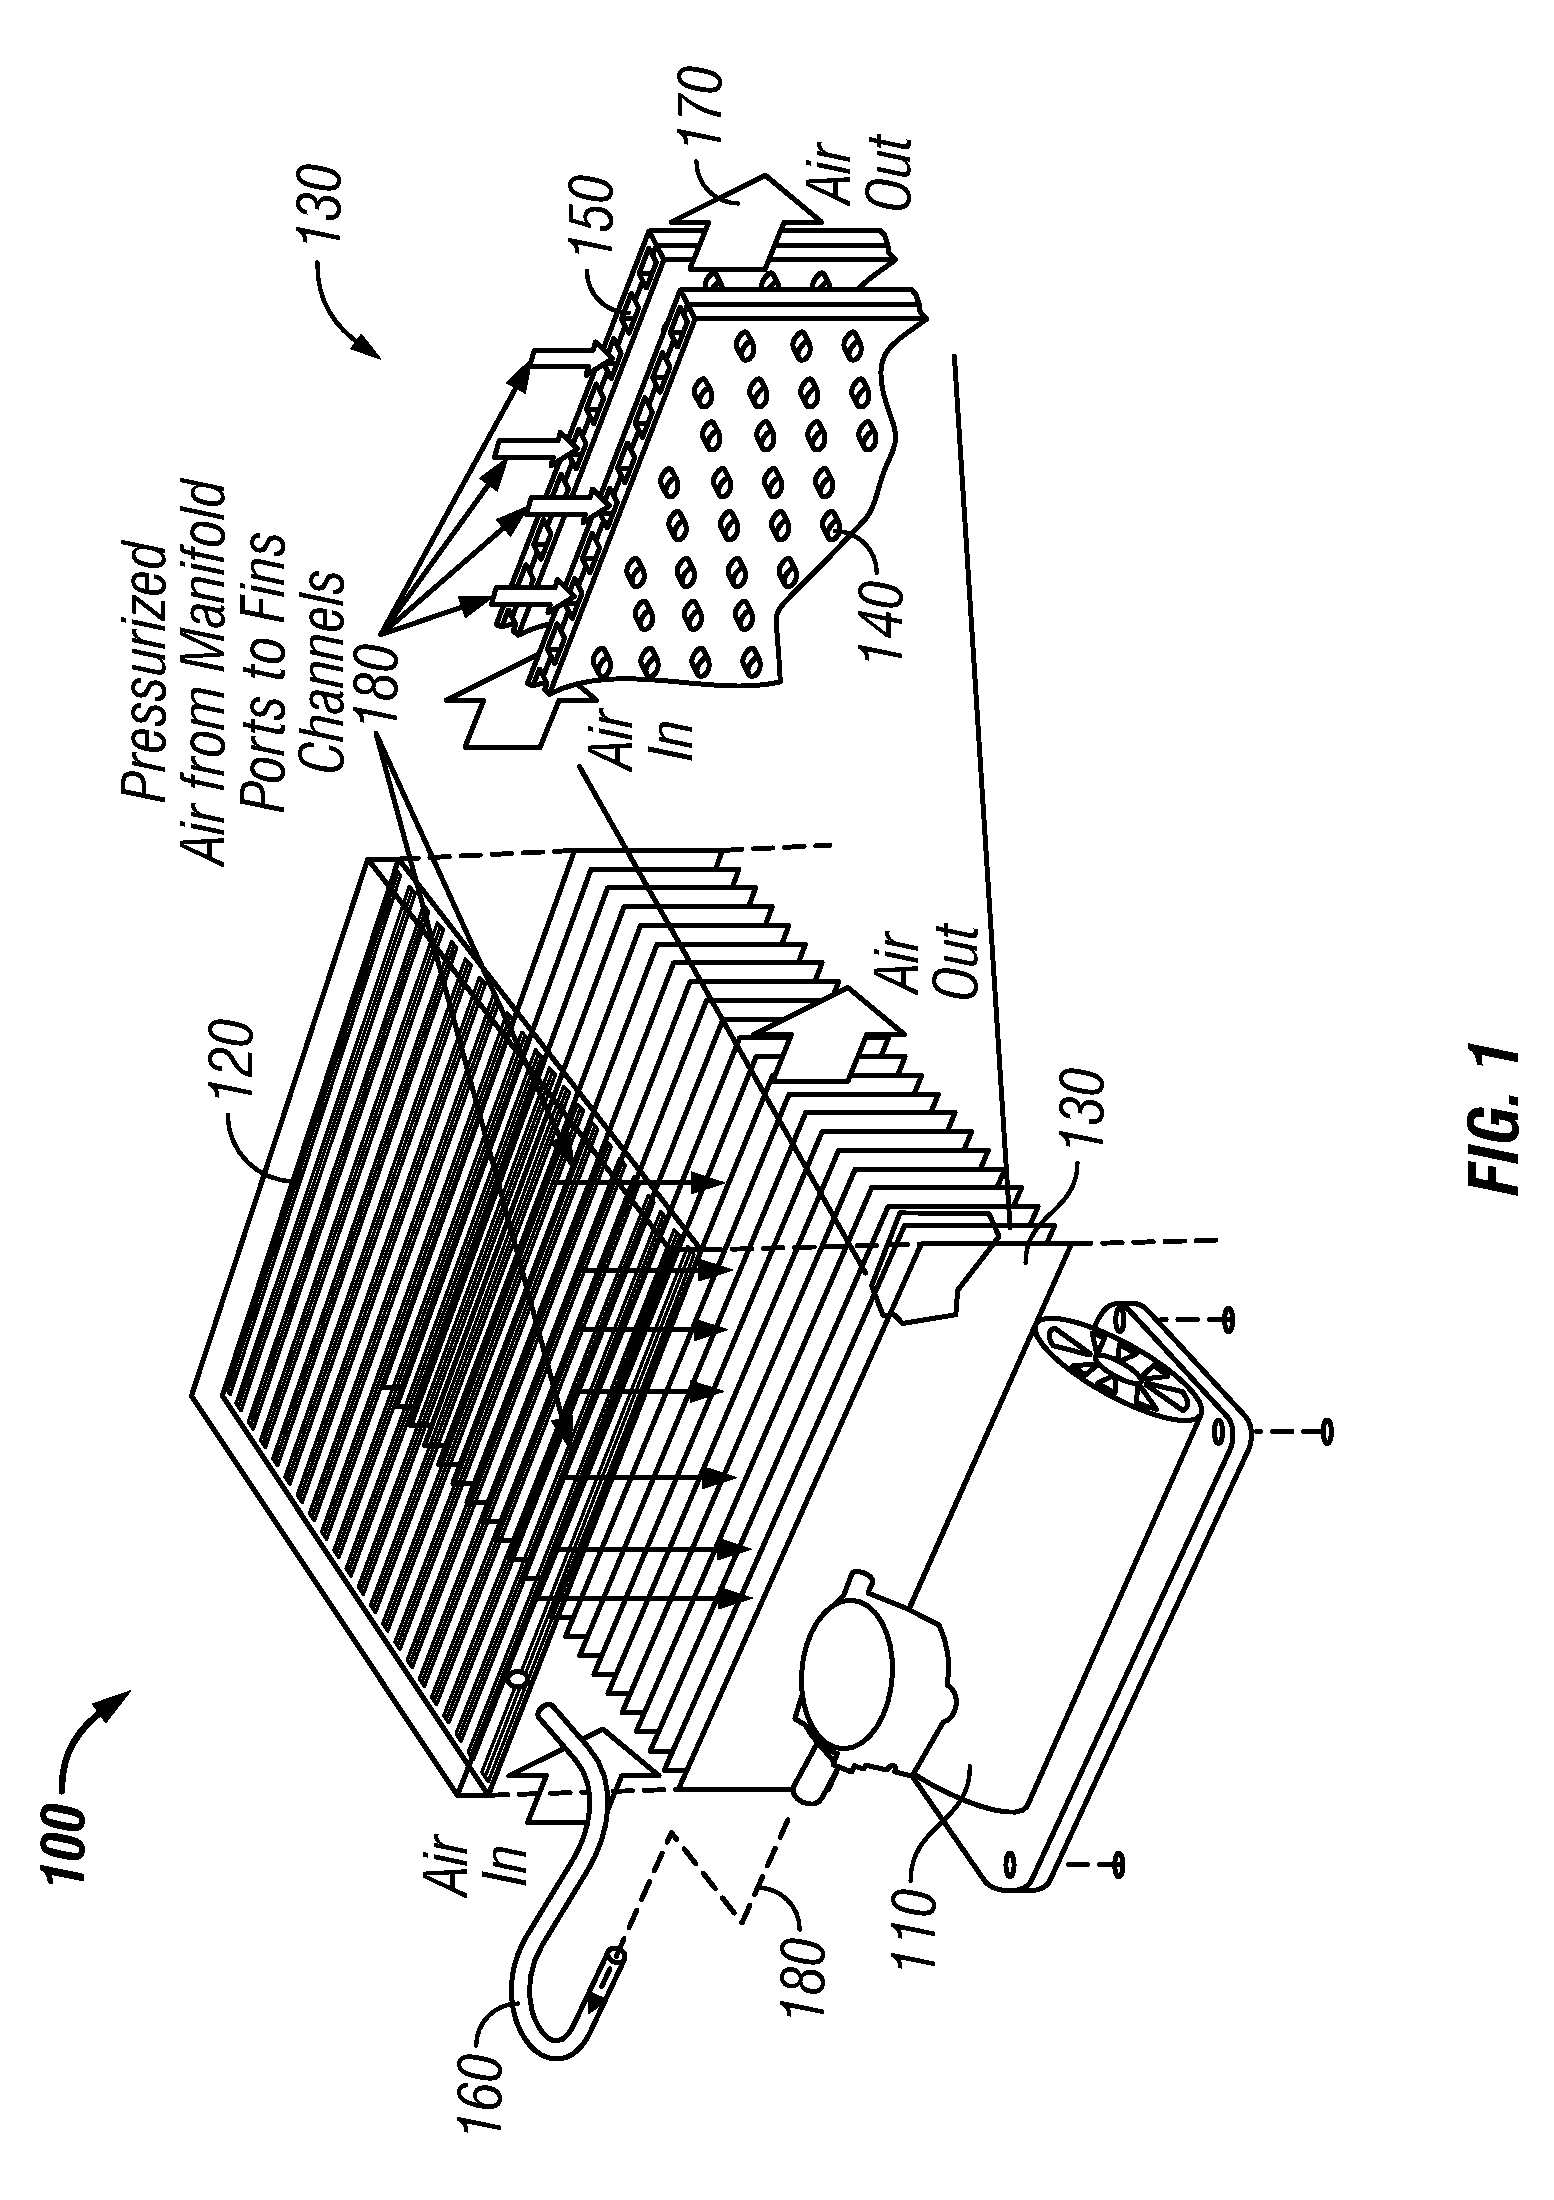 Blowerless heat exchanger based on micro-jet entrainment